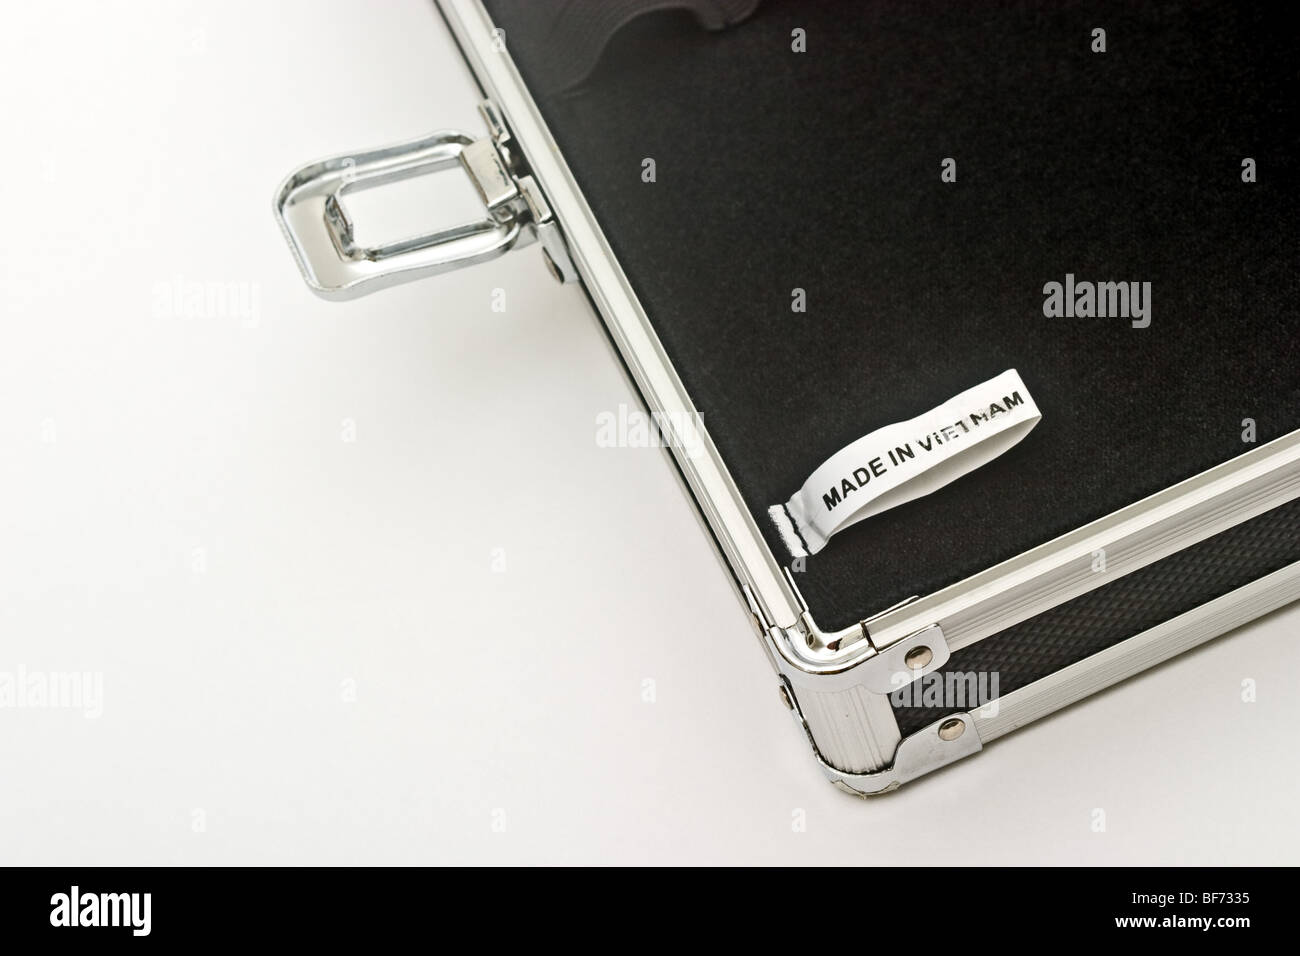 Small 'Made in Vietnam' tag inside a black case with silver latch Stock Photo